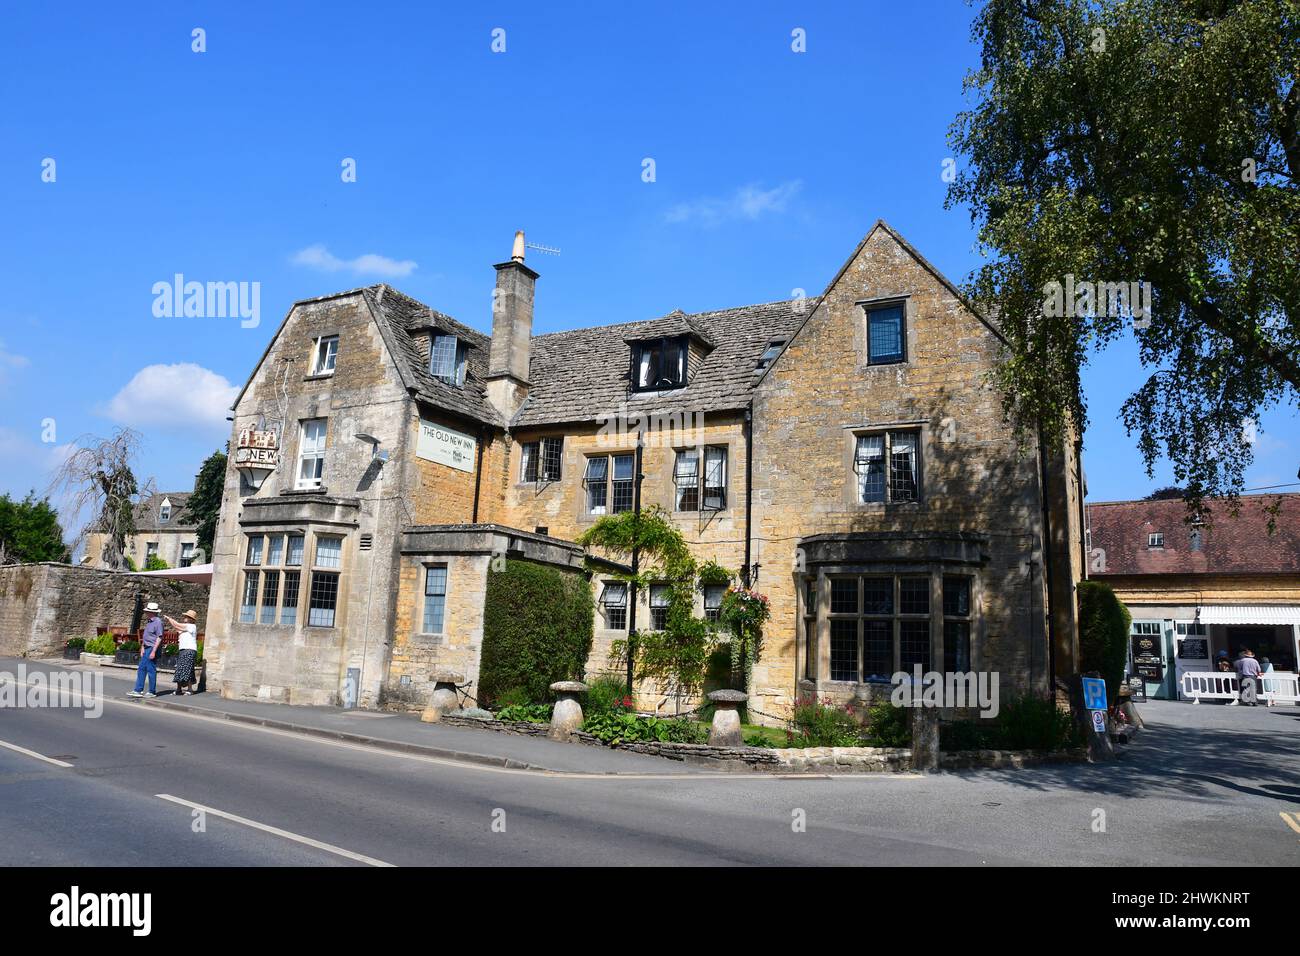 The Old New Inn, Bourton-on-the-water, Gloucestershire, Cotswolds, UK Stock Photo